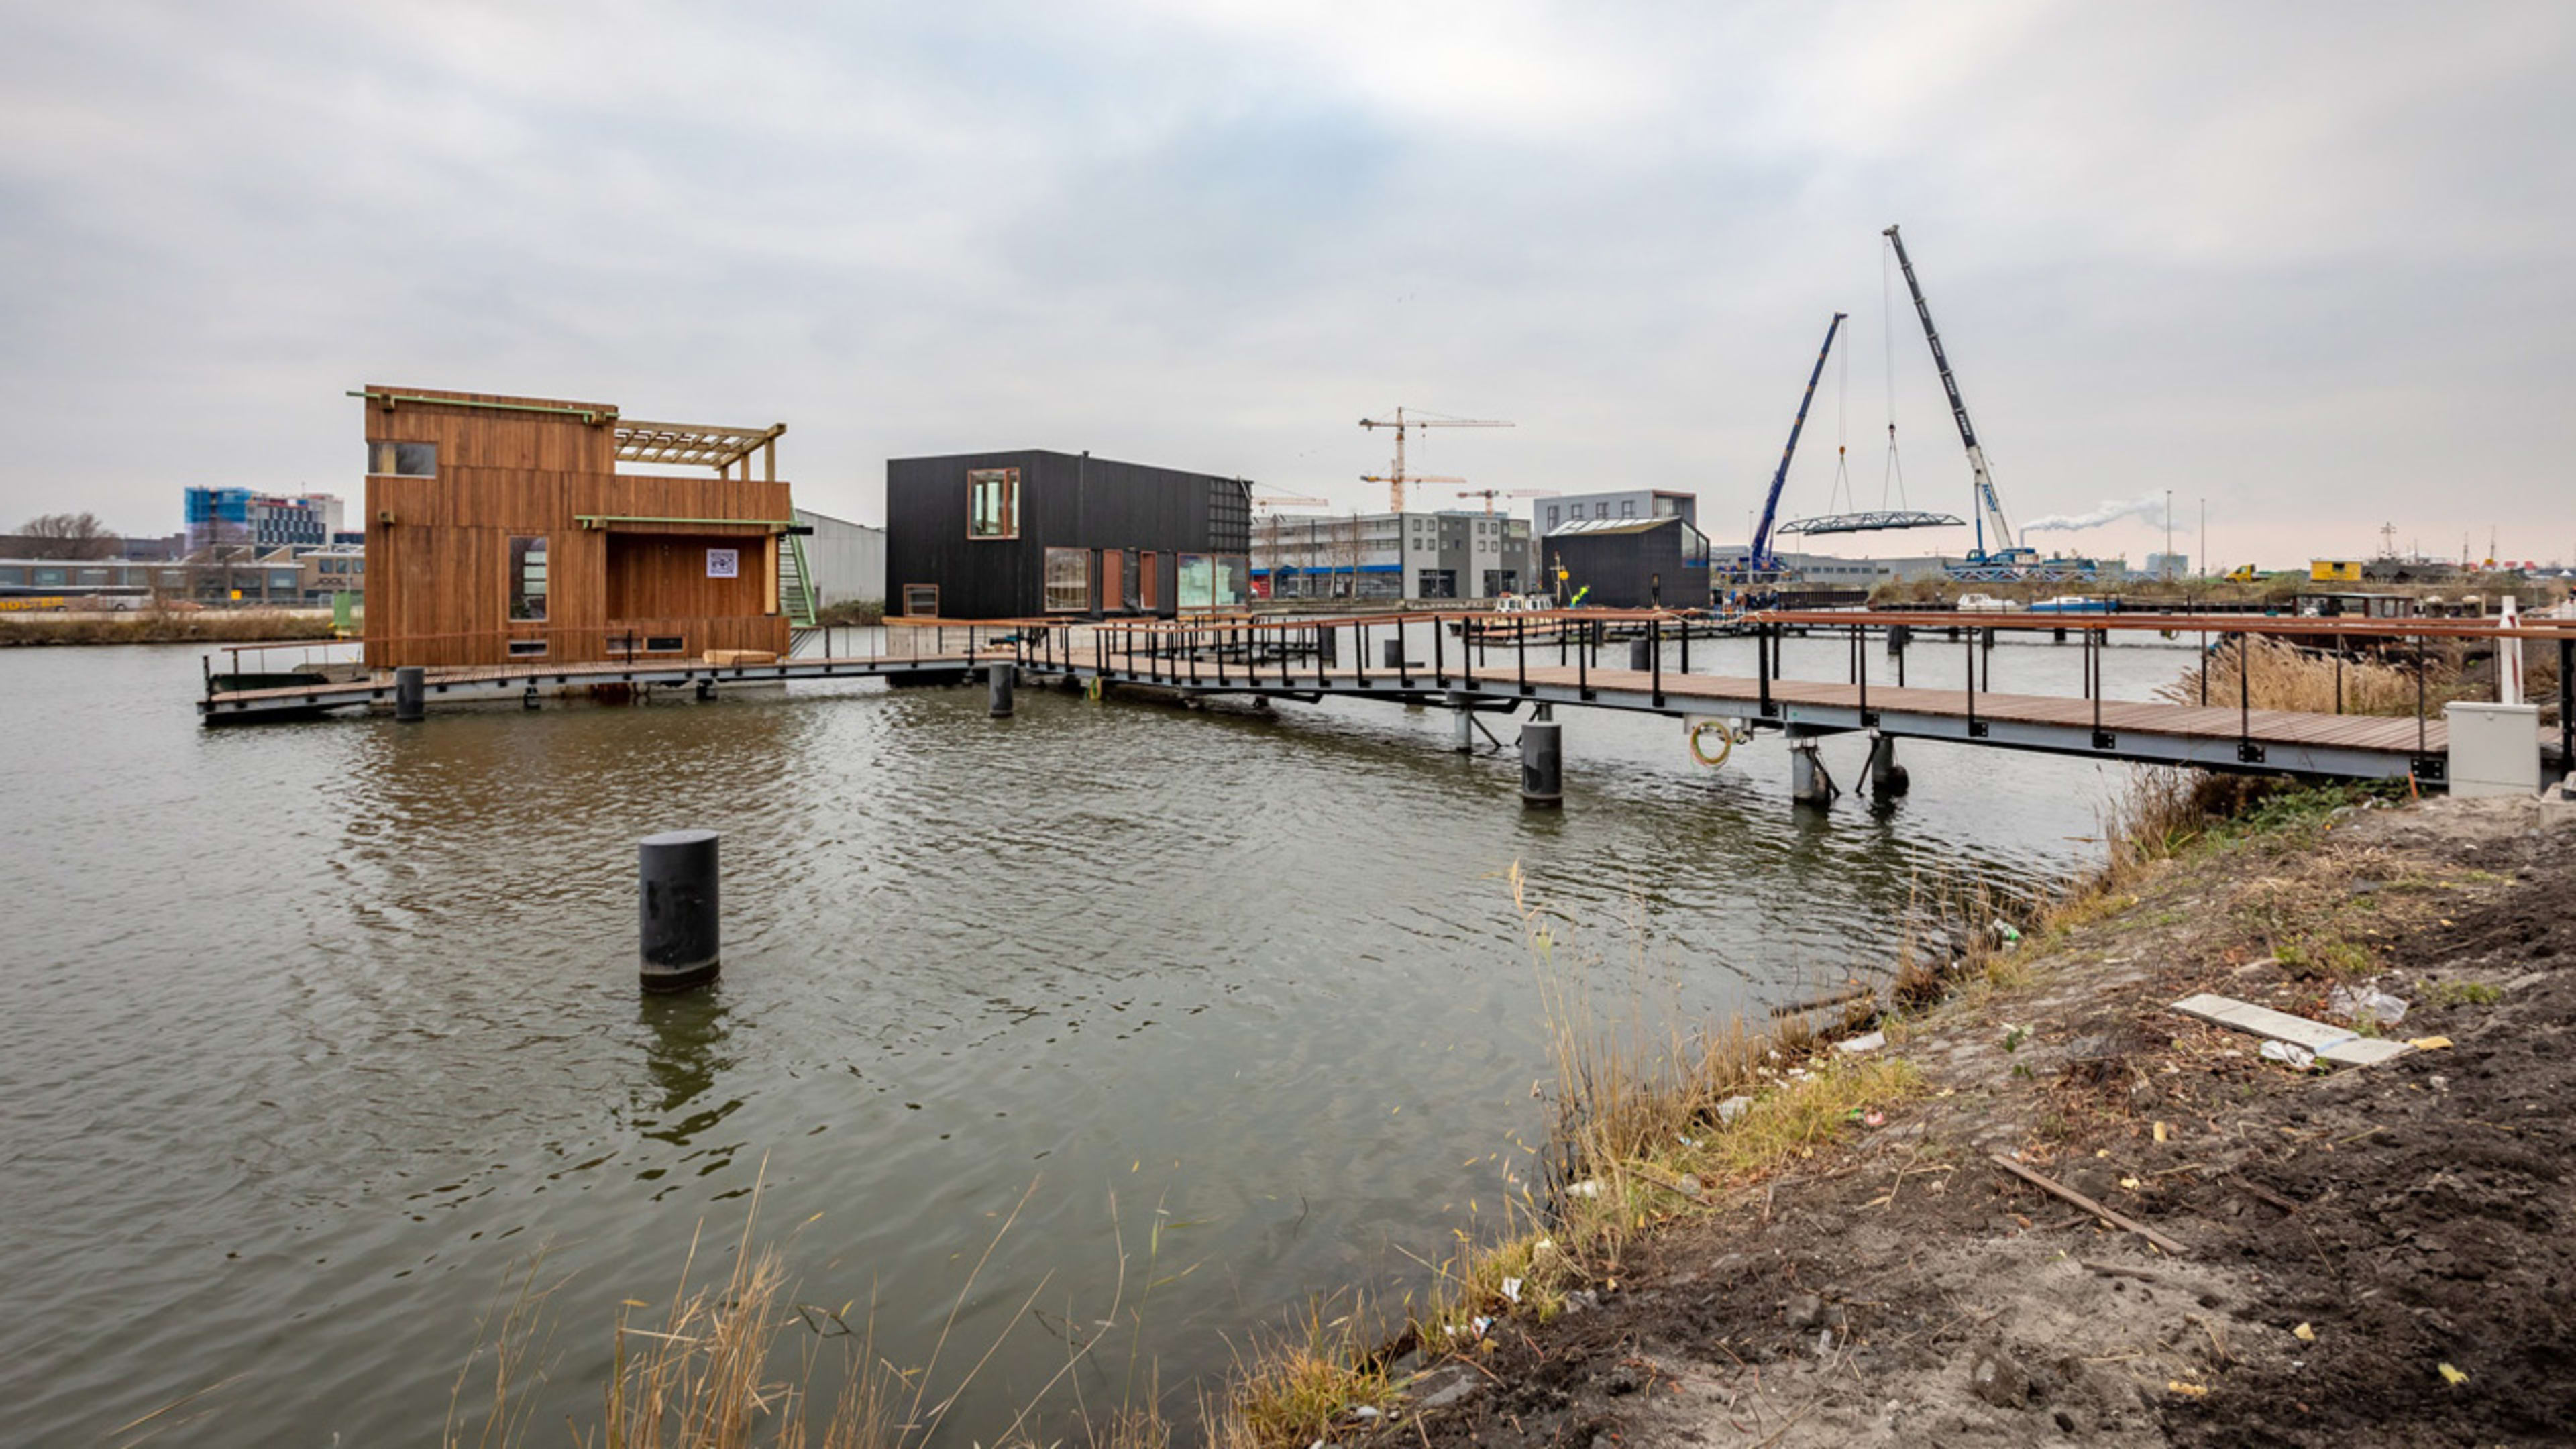 This new neighborhood in Amsterdam is made of floating houses